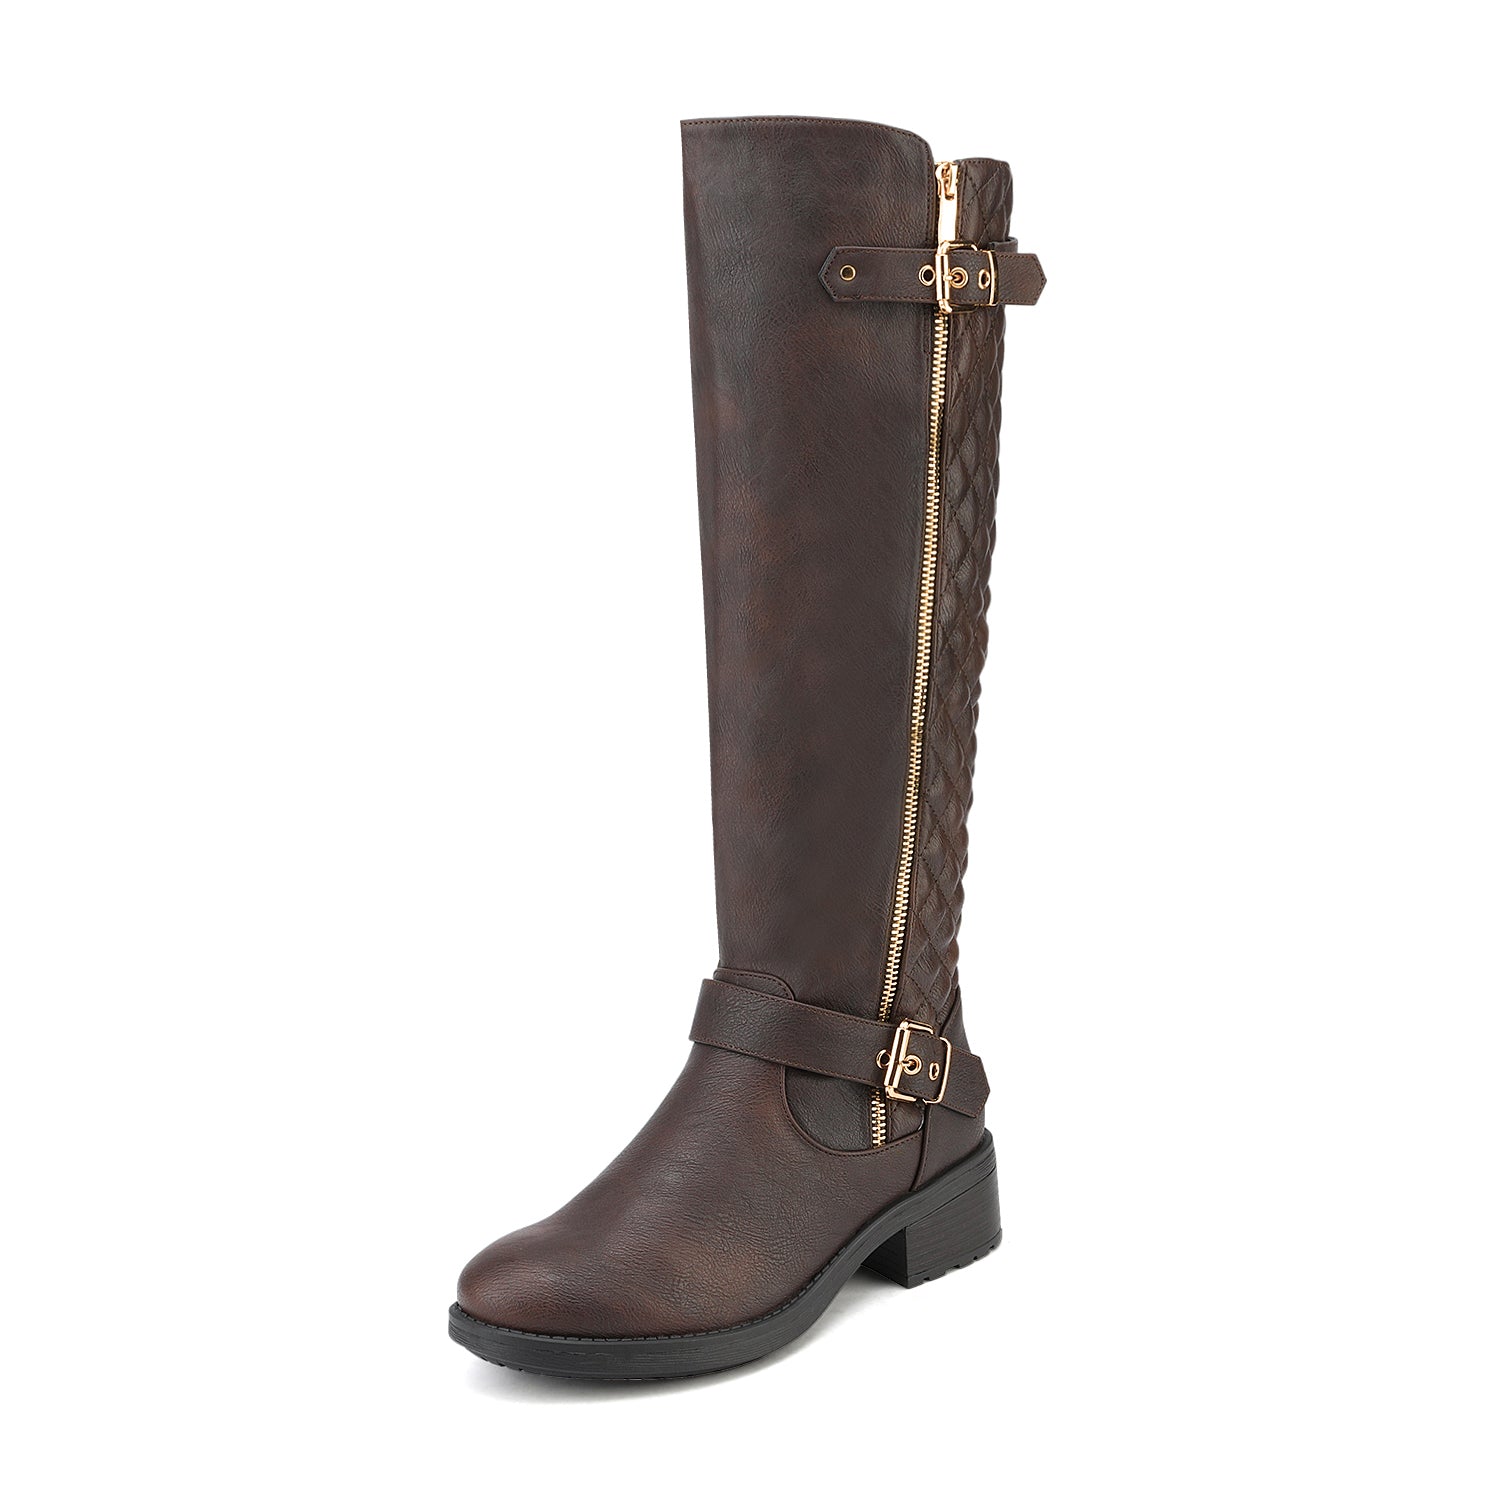 DREAM PAIRS Knee High Riding Boots